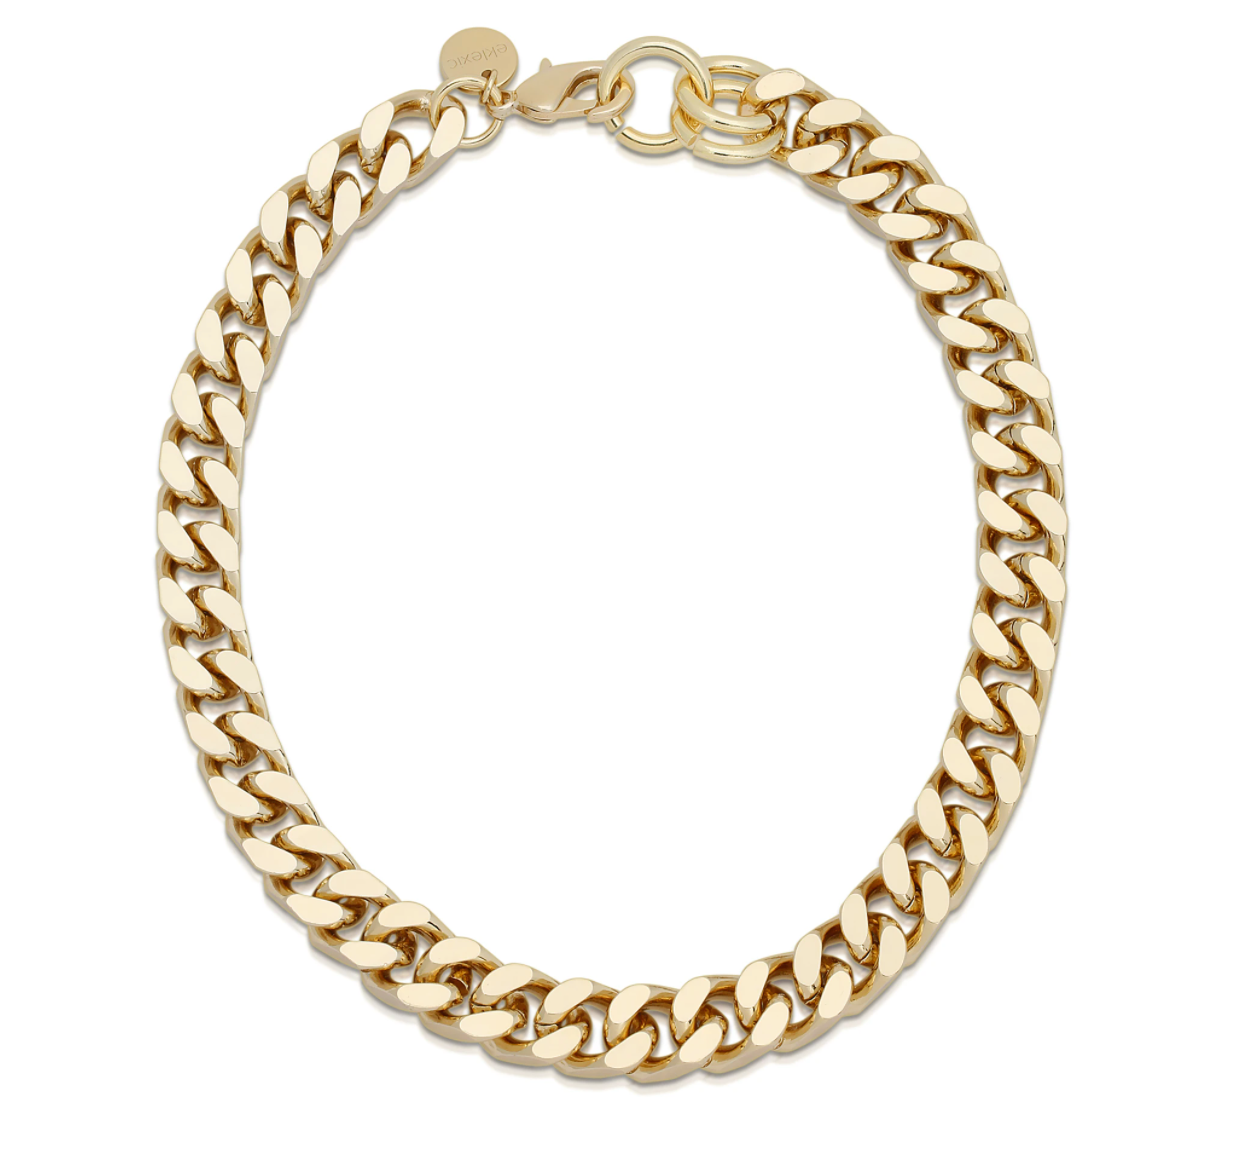 10k gold plated brass chain necklace, close up on white background.